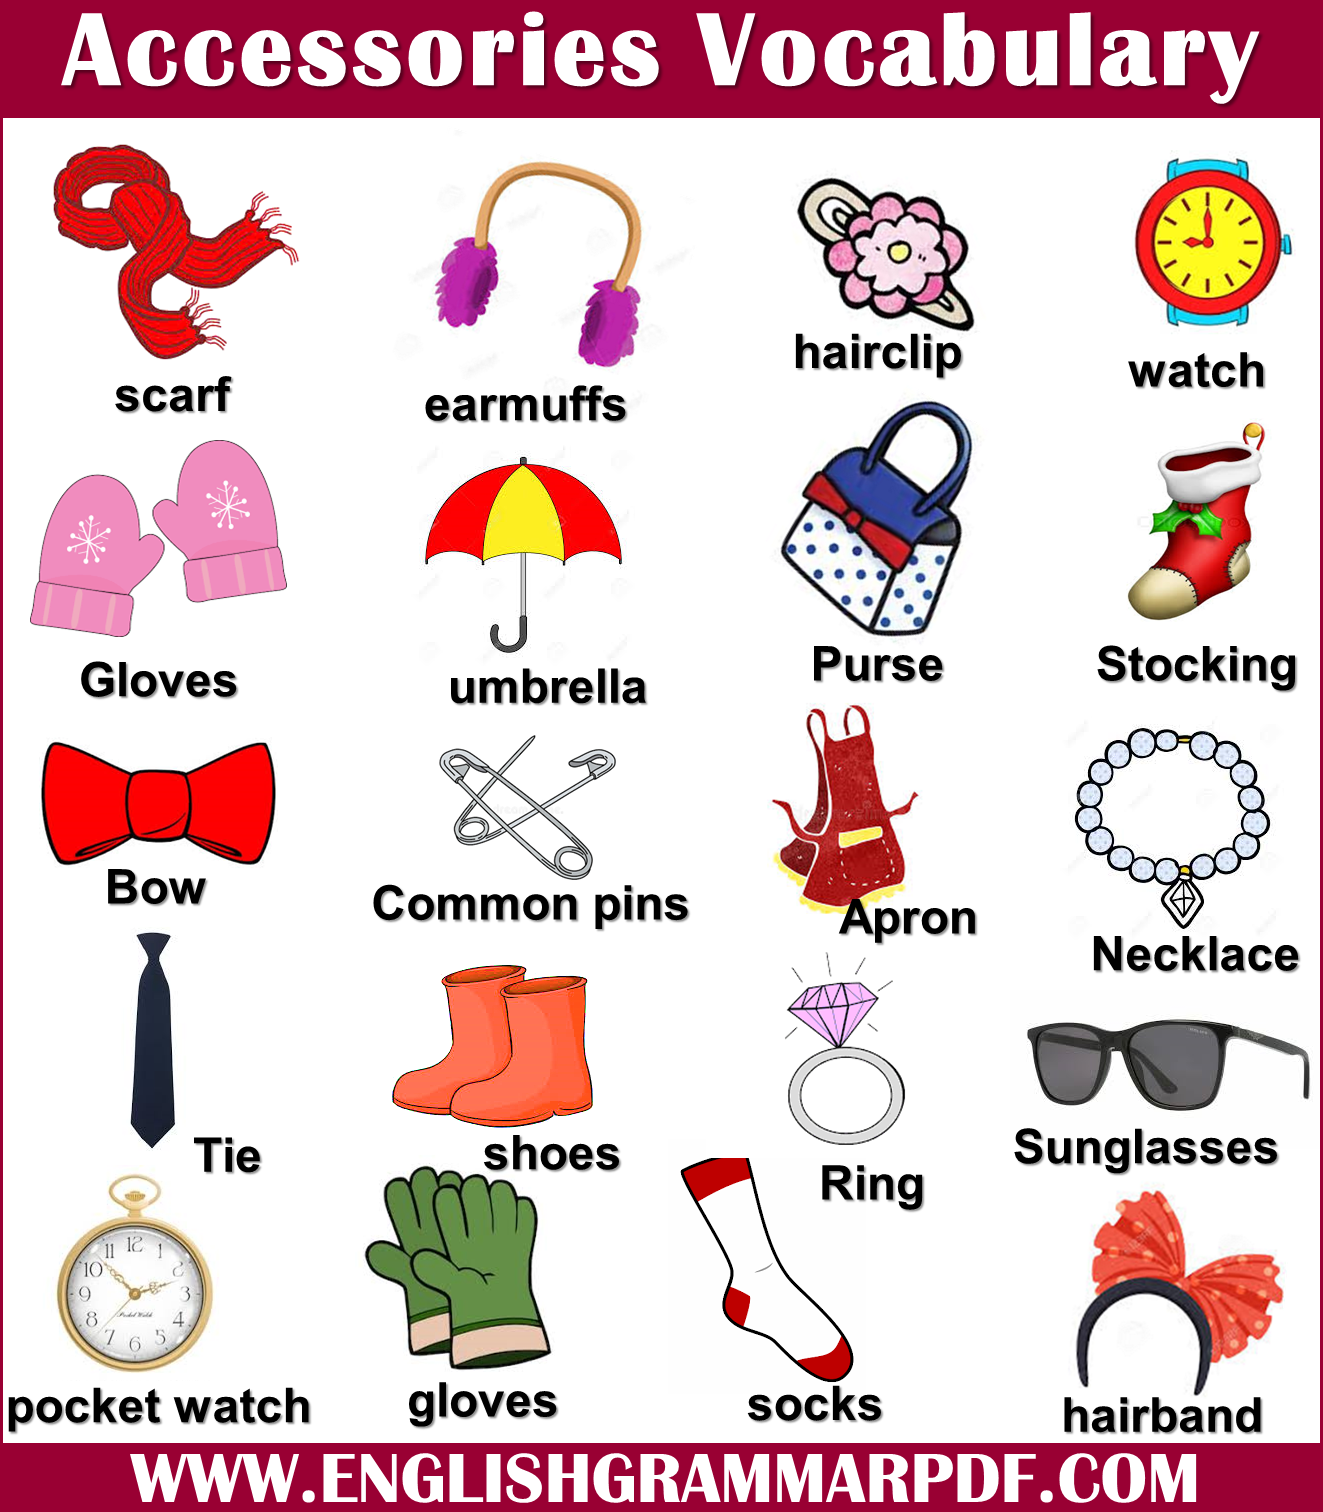 vocabulary-word-definition-picture